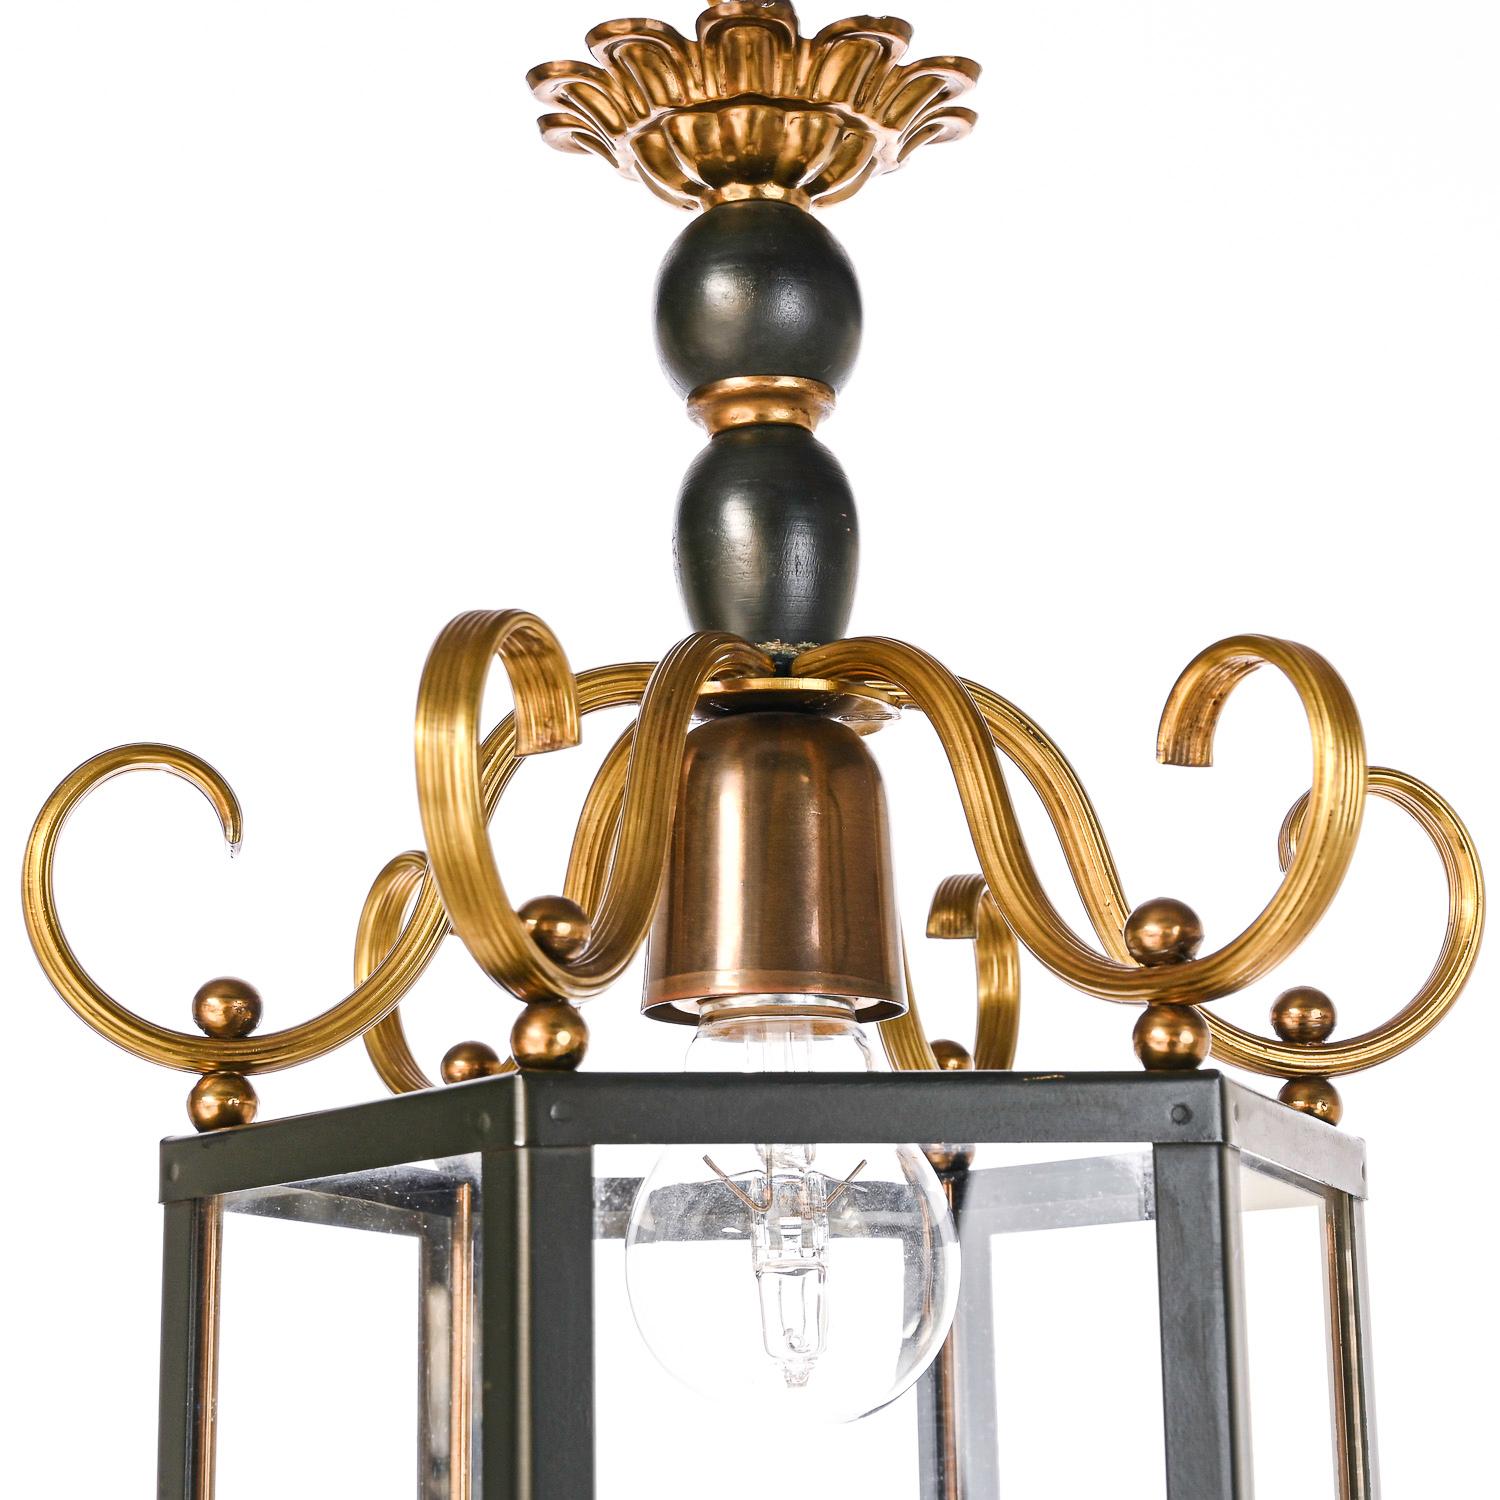 A unique lantern, consisting of six glass panels etched with a star prism. Brass and wooden dark green frame.